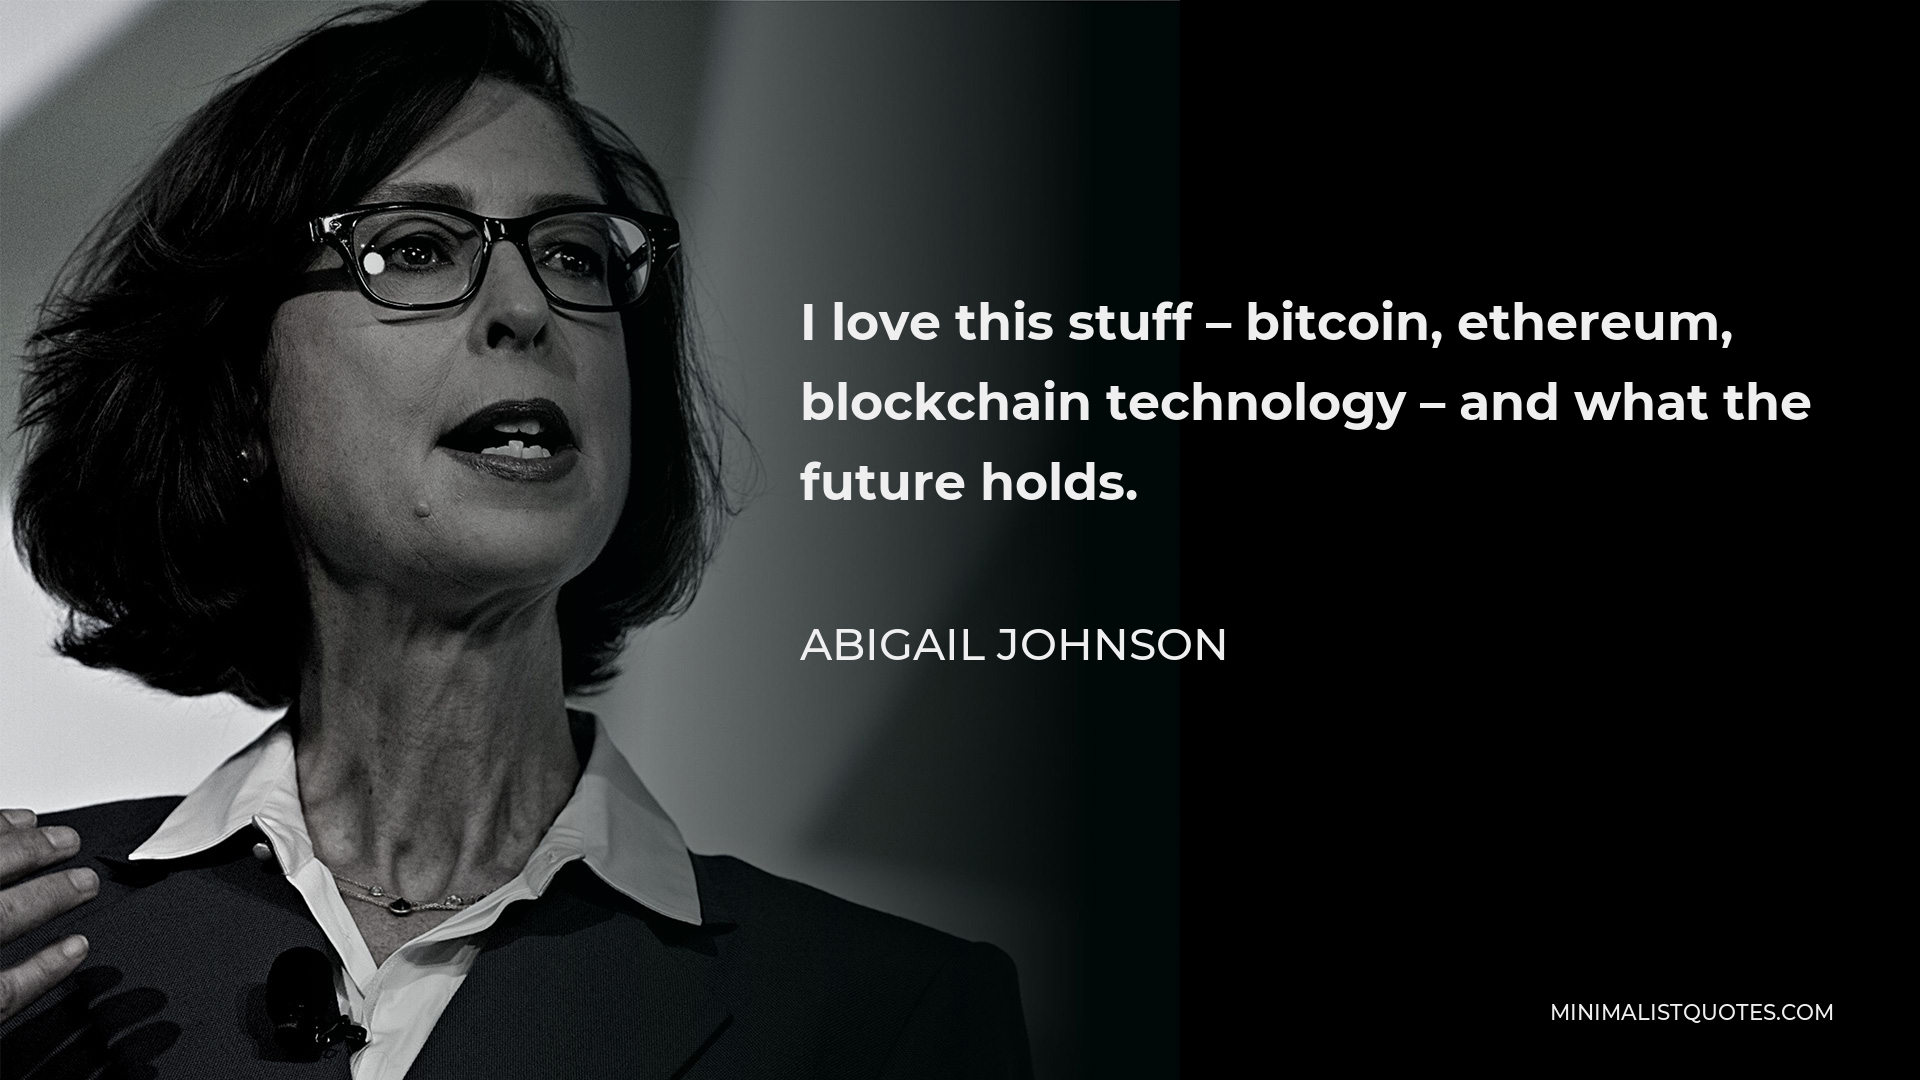 Abigail Johnson Quote - I love this stuff – bitcoin, ethereum, blockchain technology – and what the future holds.